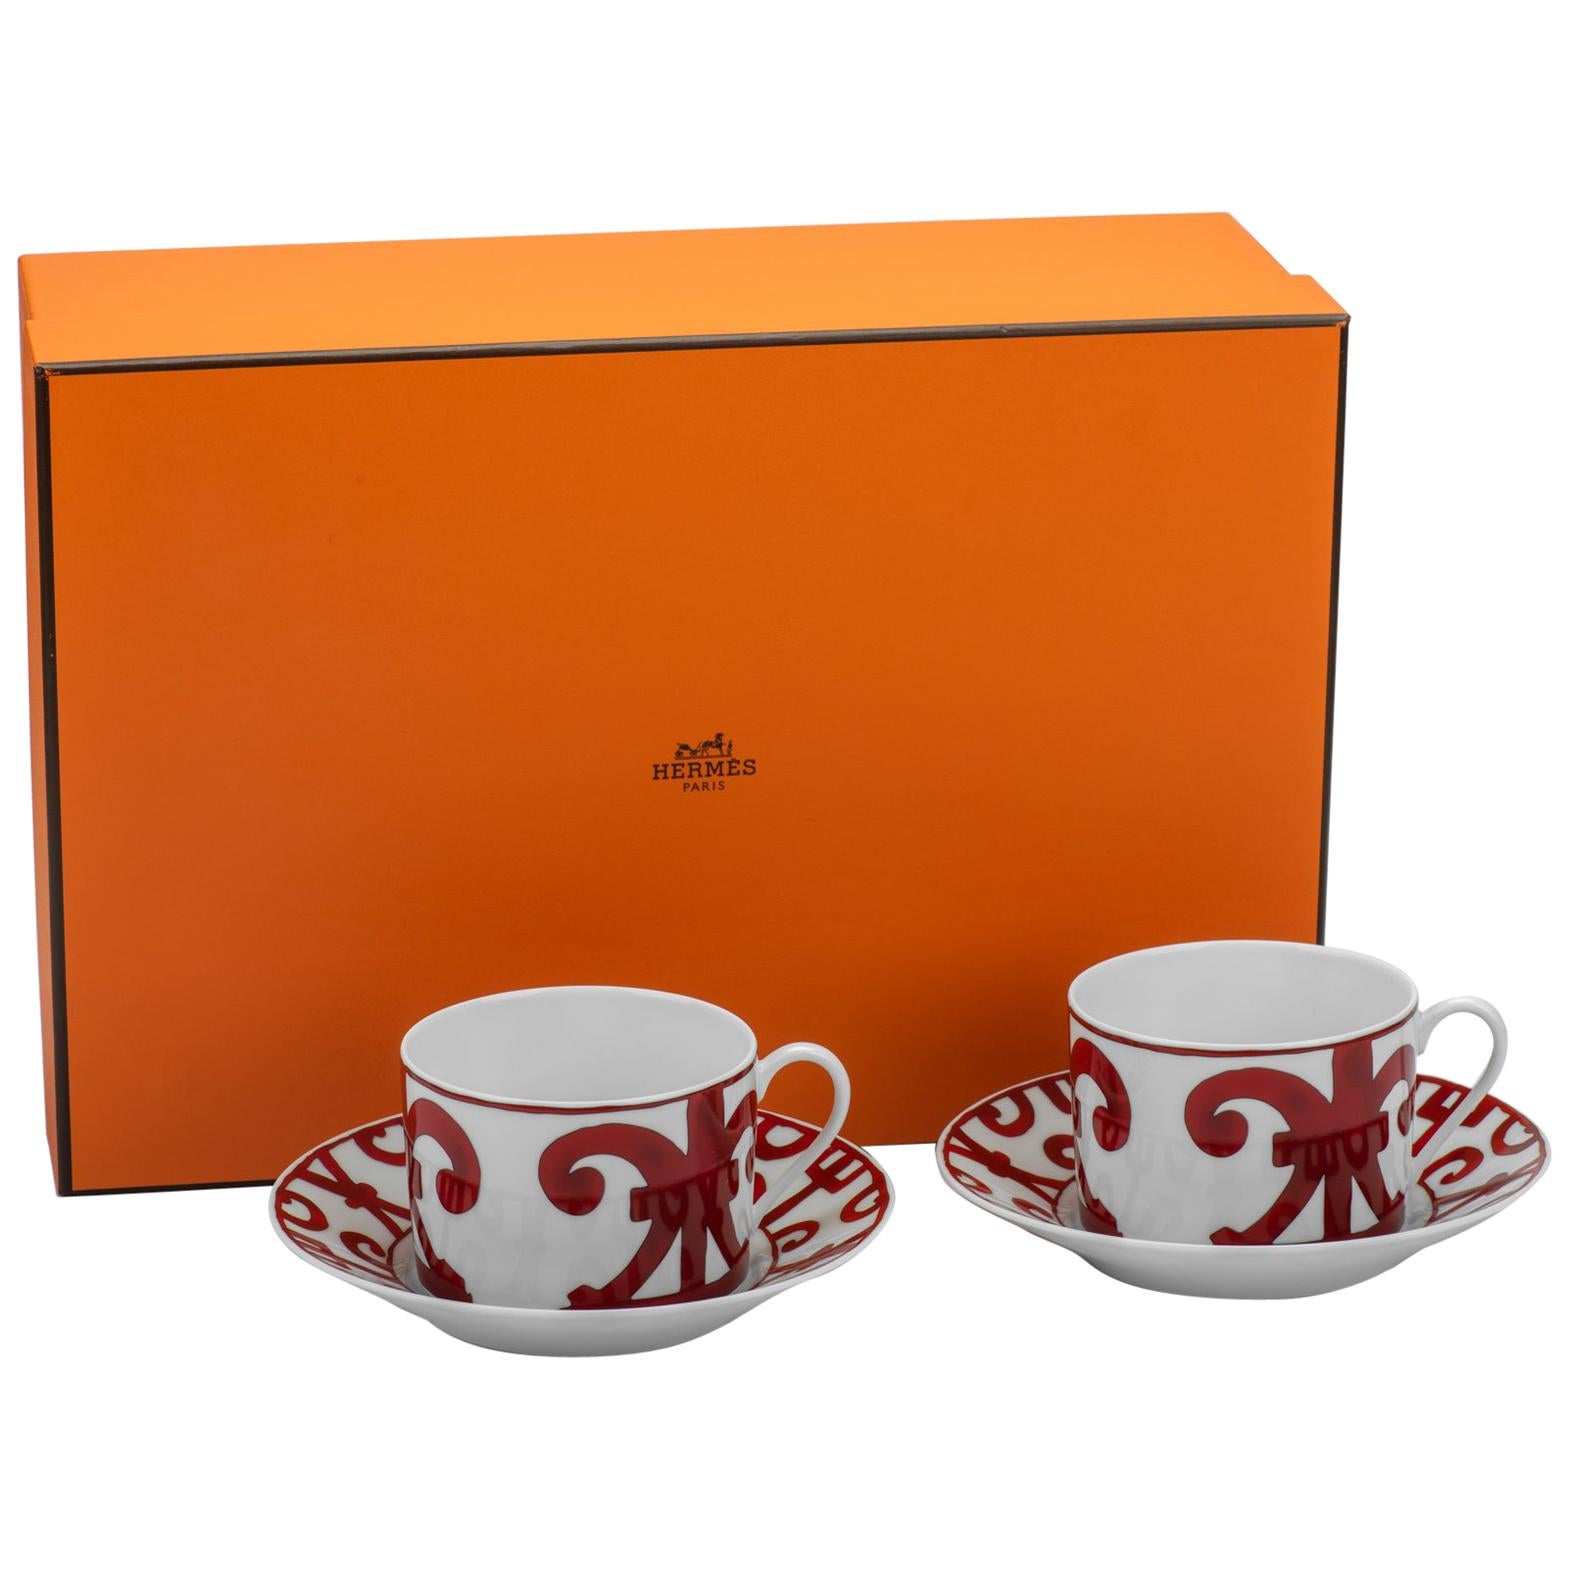 Hermès Set of 2 Red White Breakfast Cups 